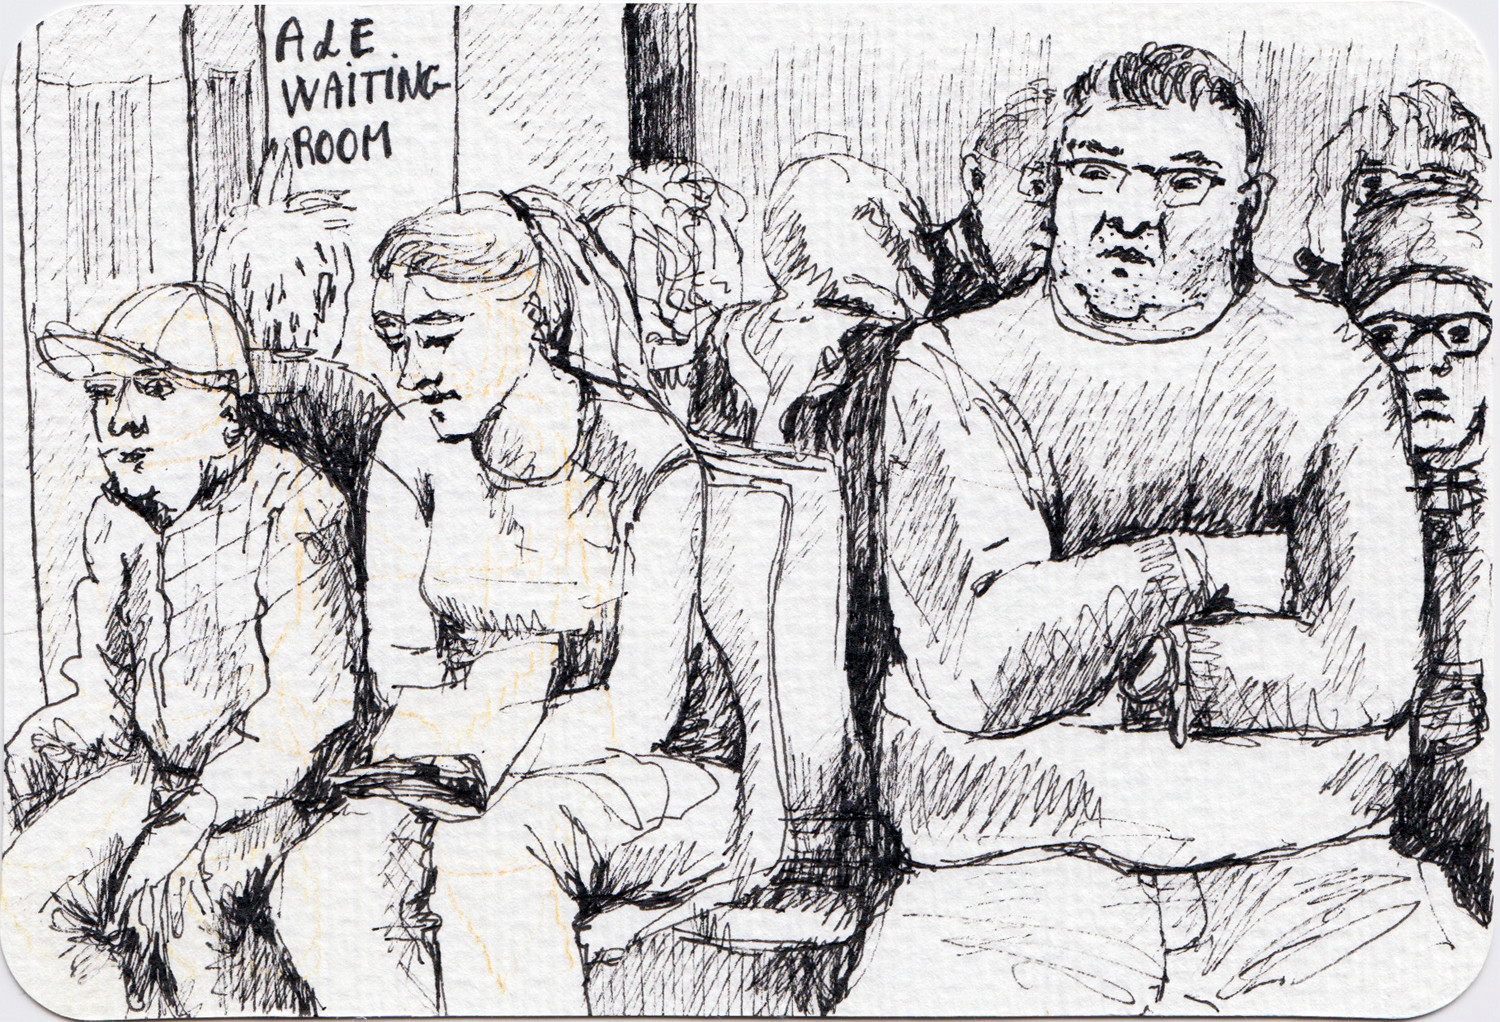 Packed A & E waiting room - sketch by Sophie Peanut